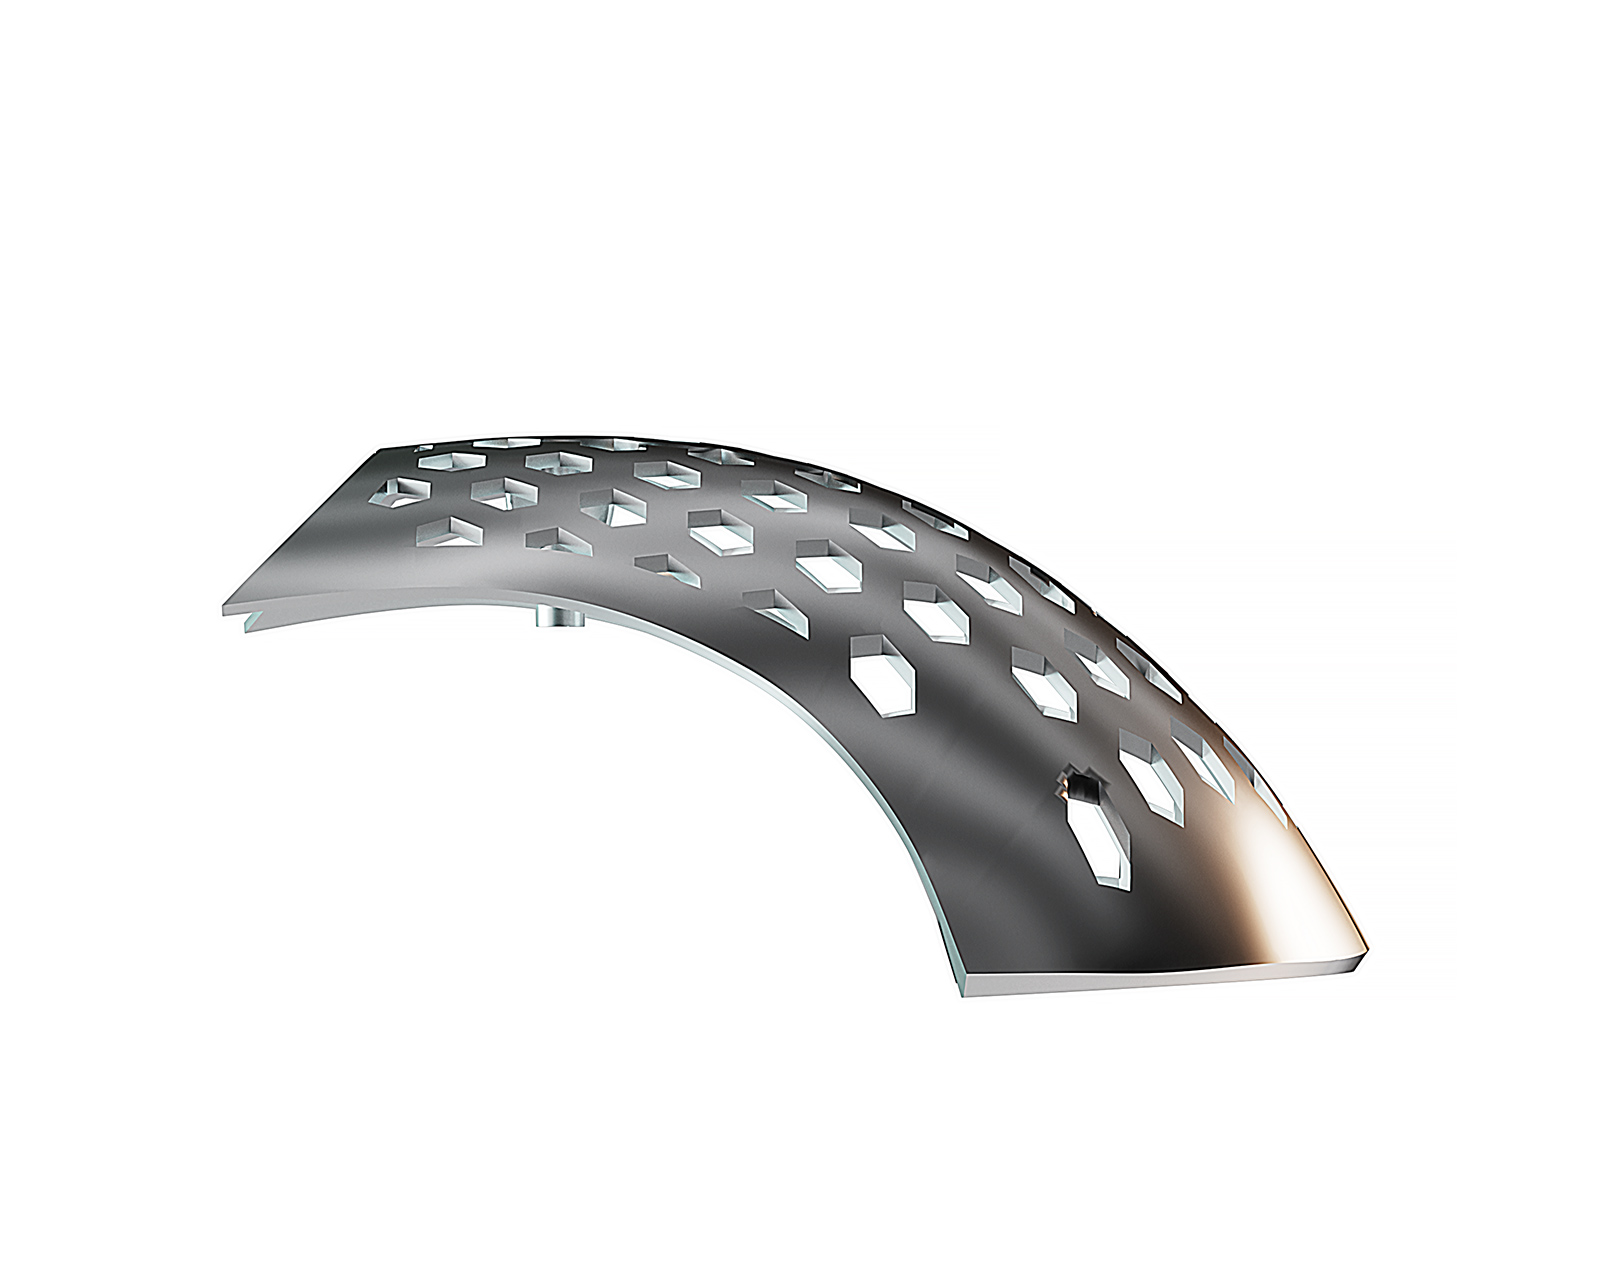 Infinity Hump Pro - Claw Shape Hump for FinalMouse Starlight - Silver/Black  - M